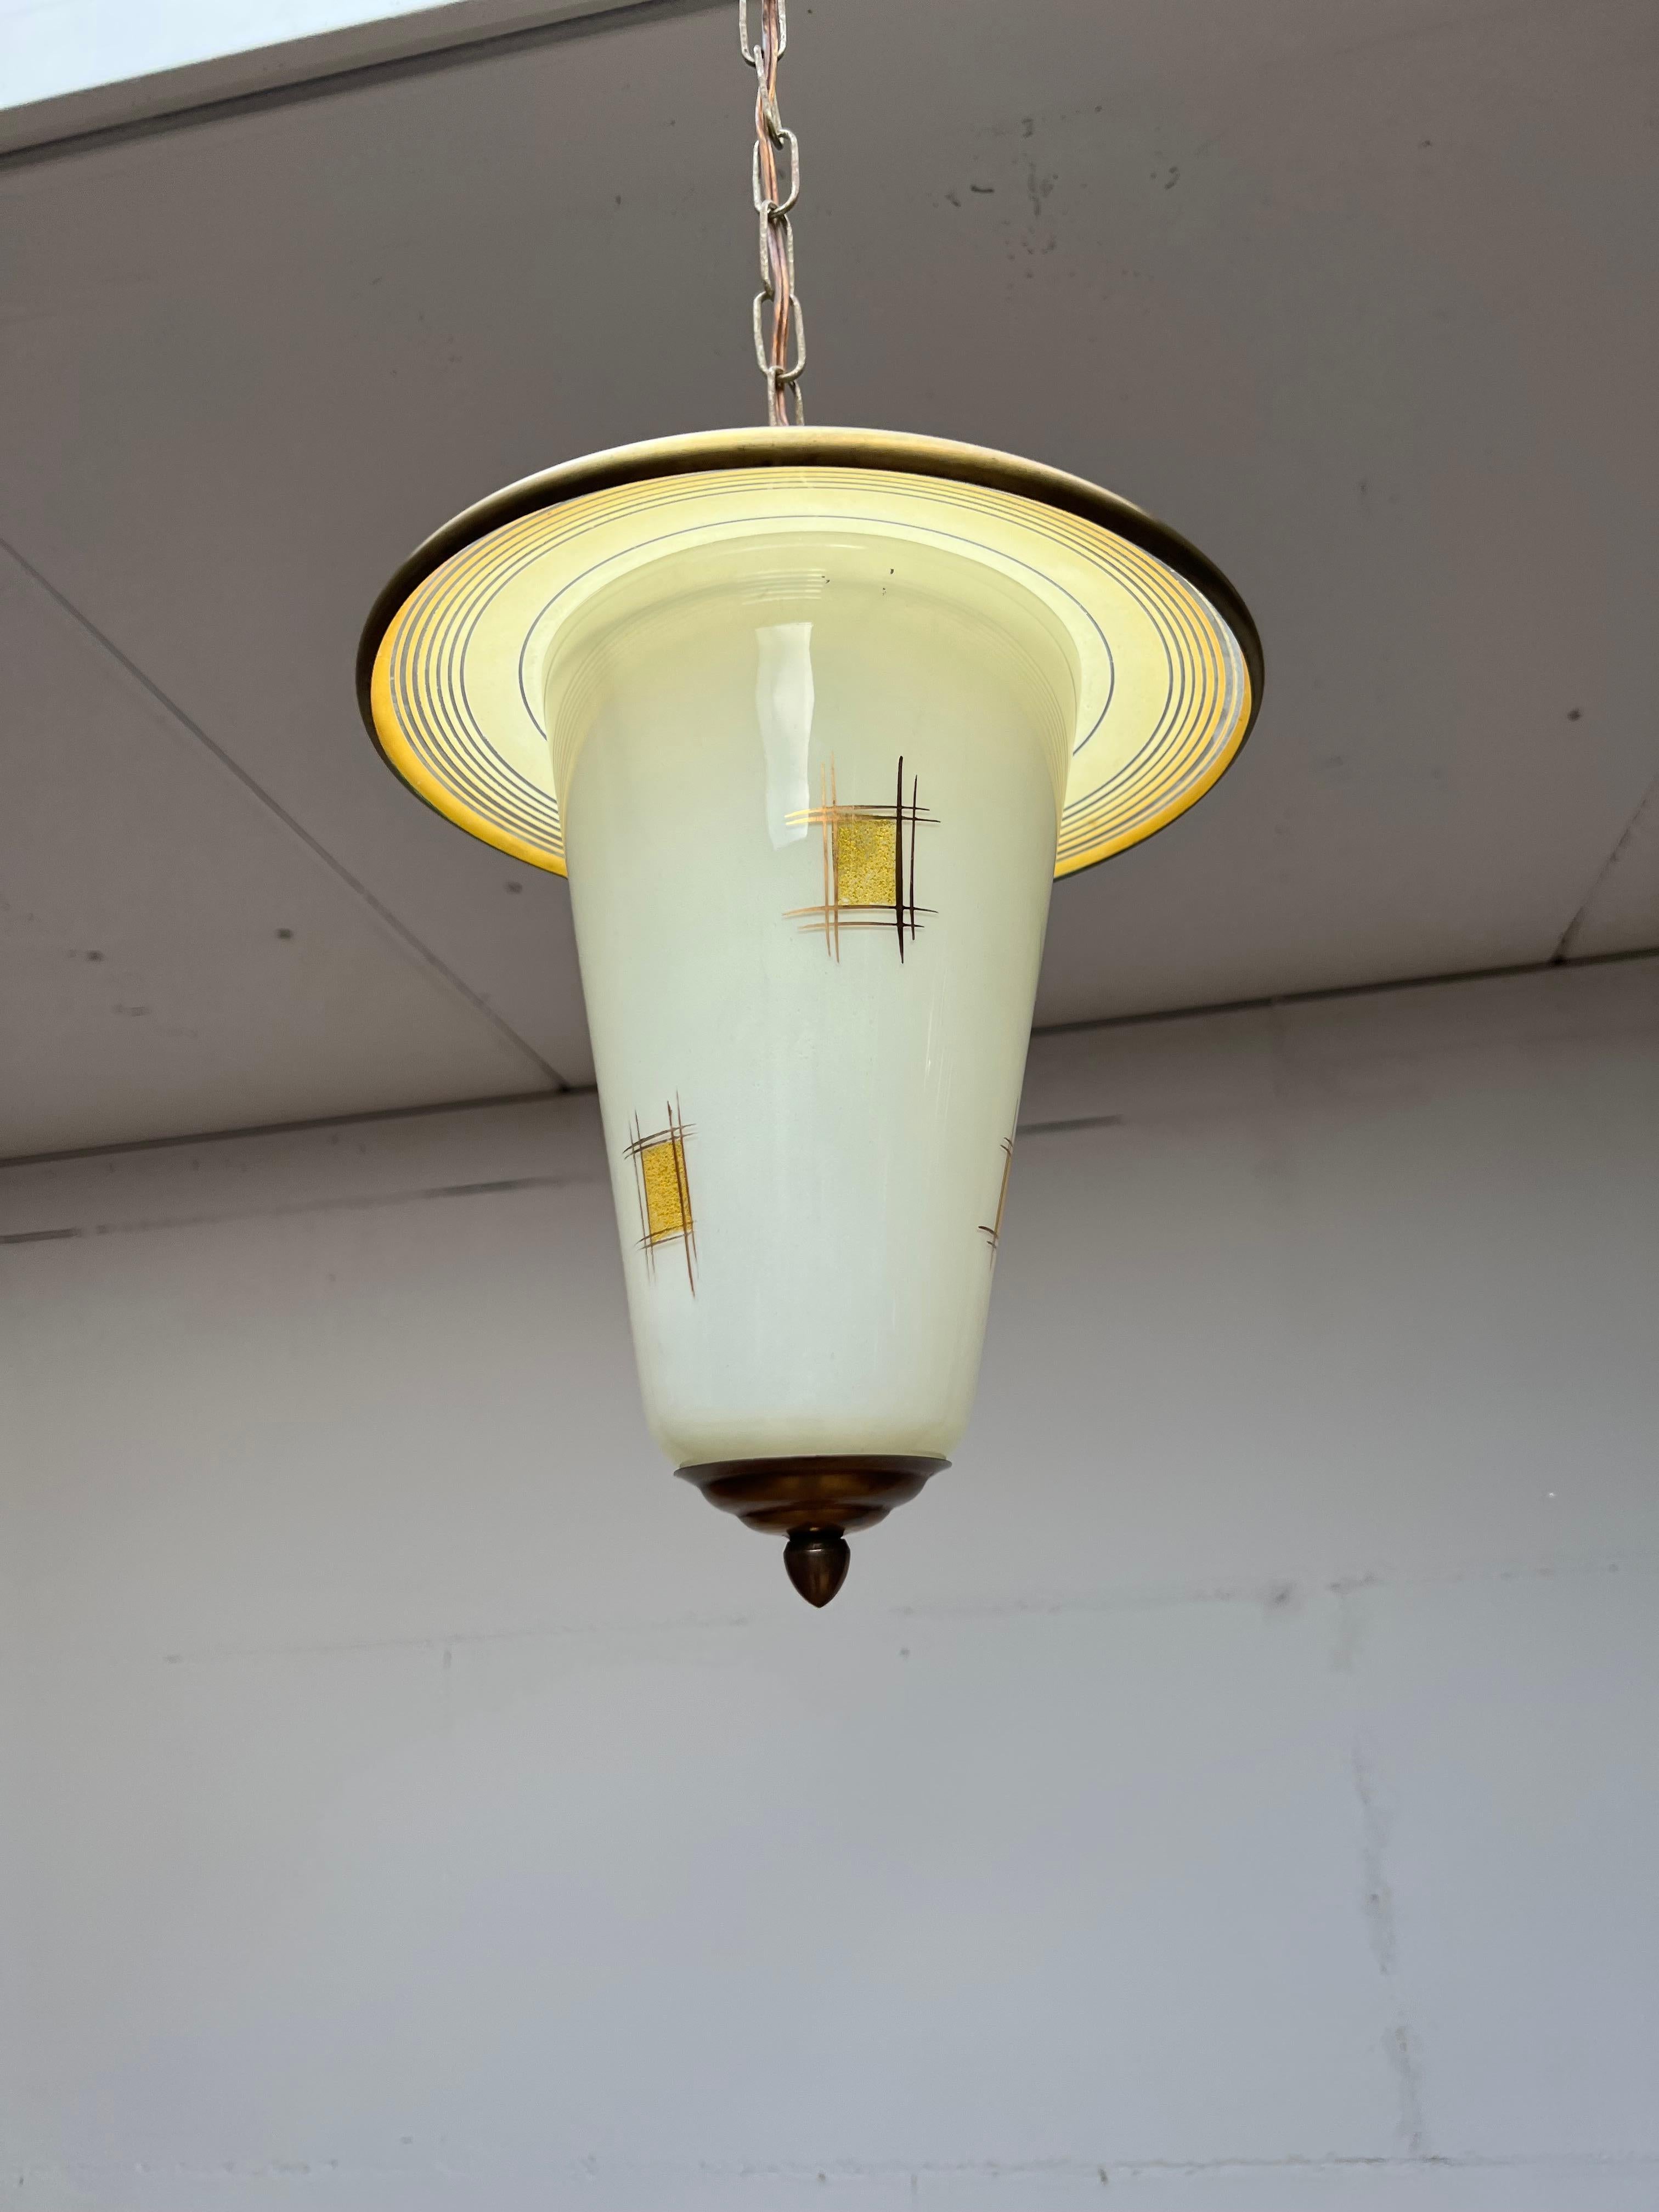 Handcrafted and stylish Mid-Century Modern lantern or ceiling lamp for your stairwell, hallway or bedroom.

This all handcrafted, practical size and beautiful looking ceiling lamp is another one of our recent great finds. The beautiful overal